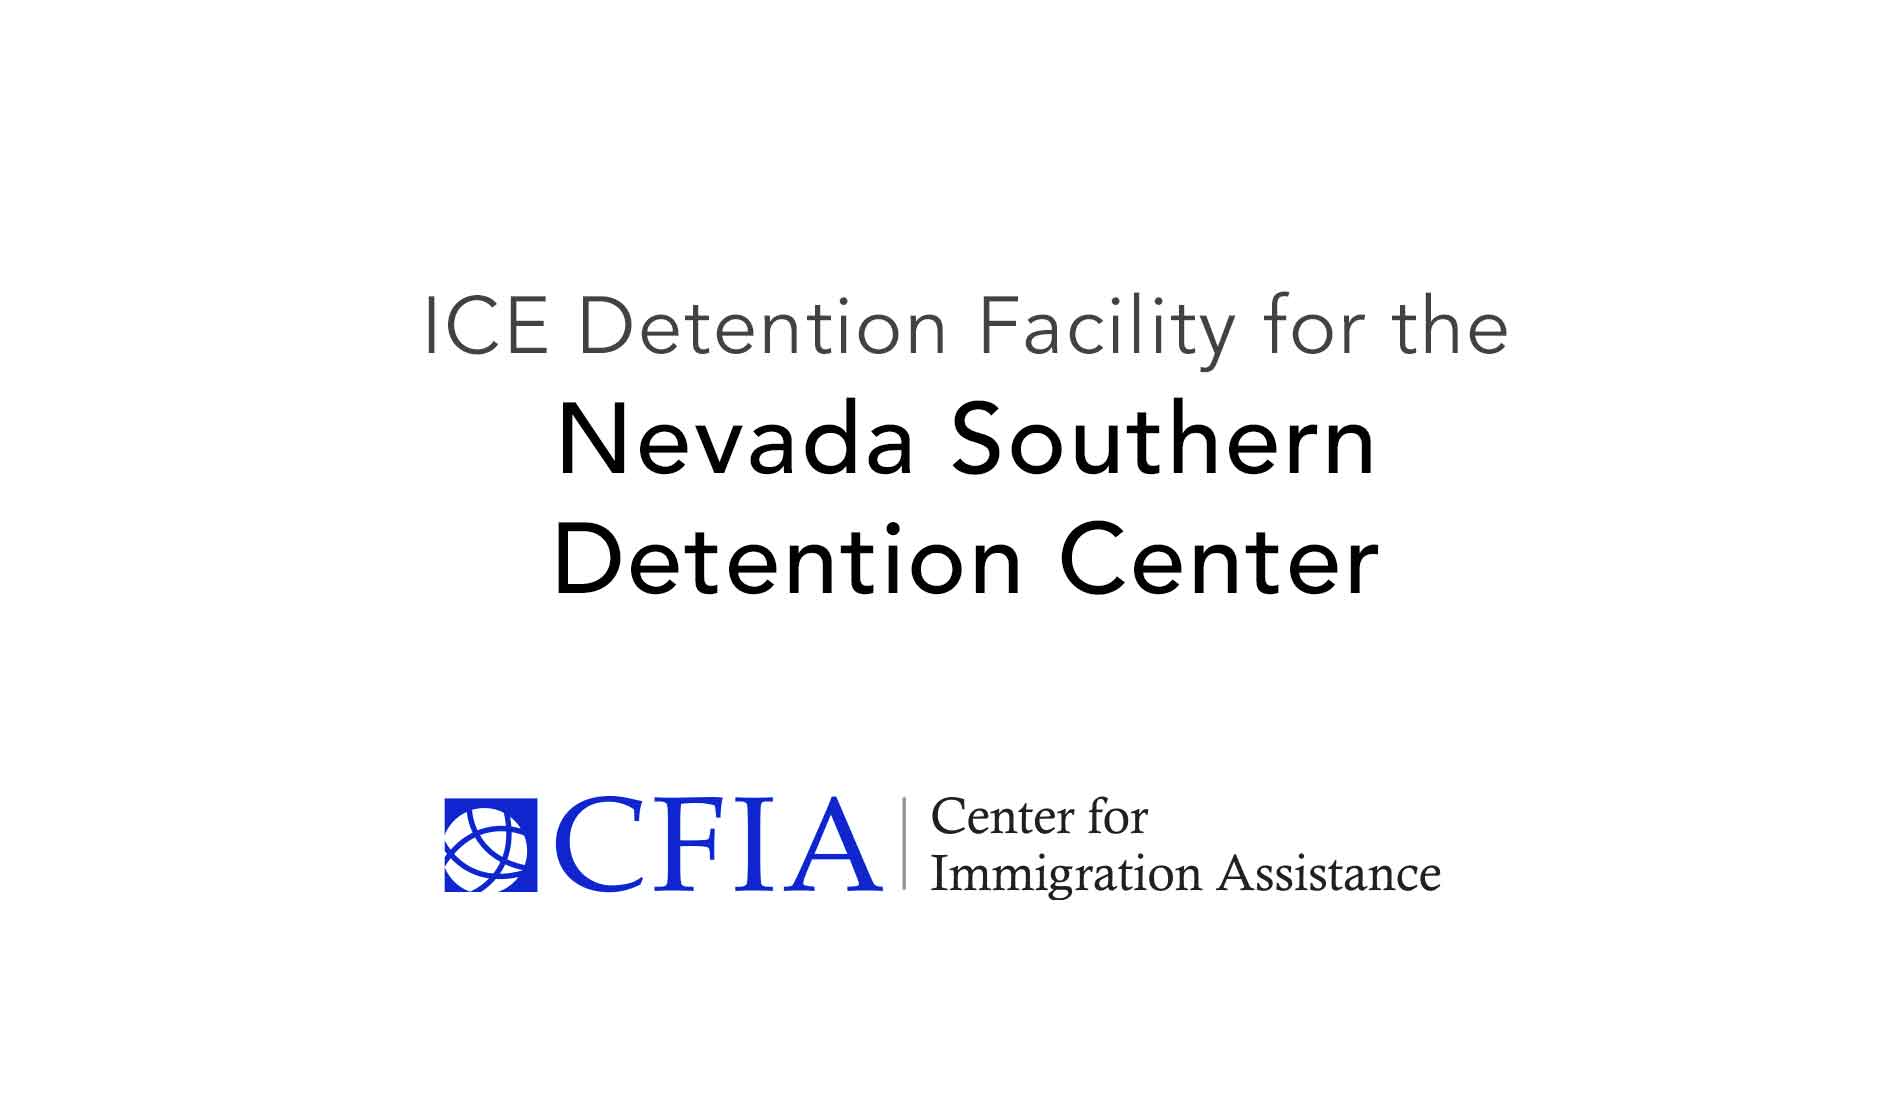 Nevada Southern Detention Center